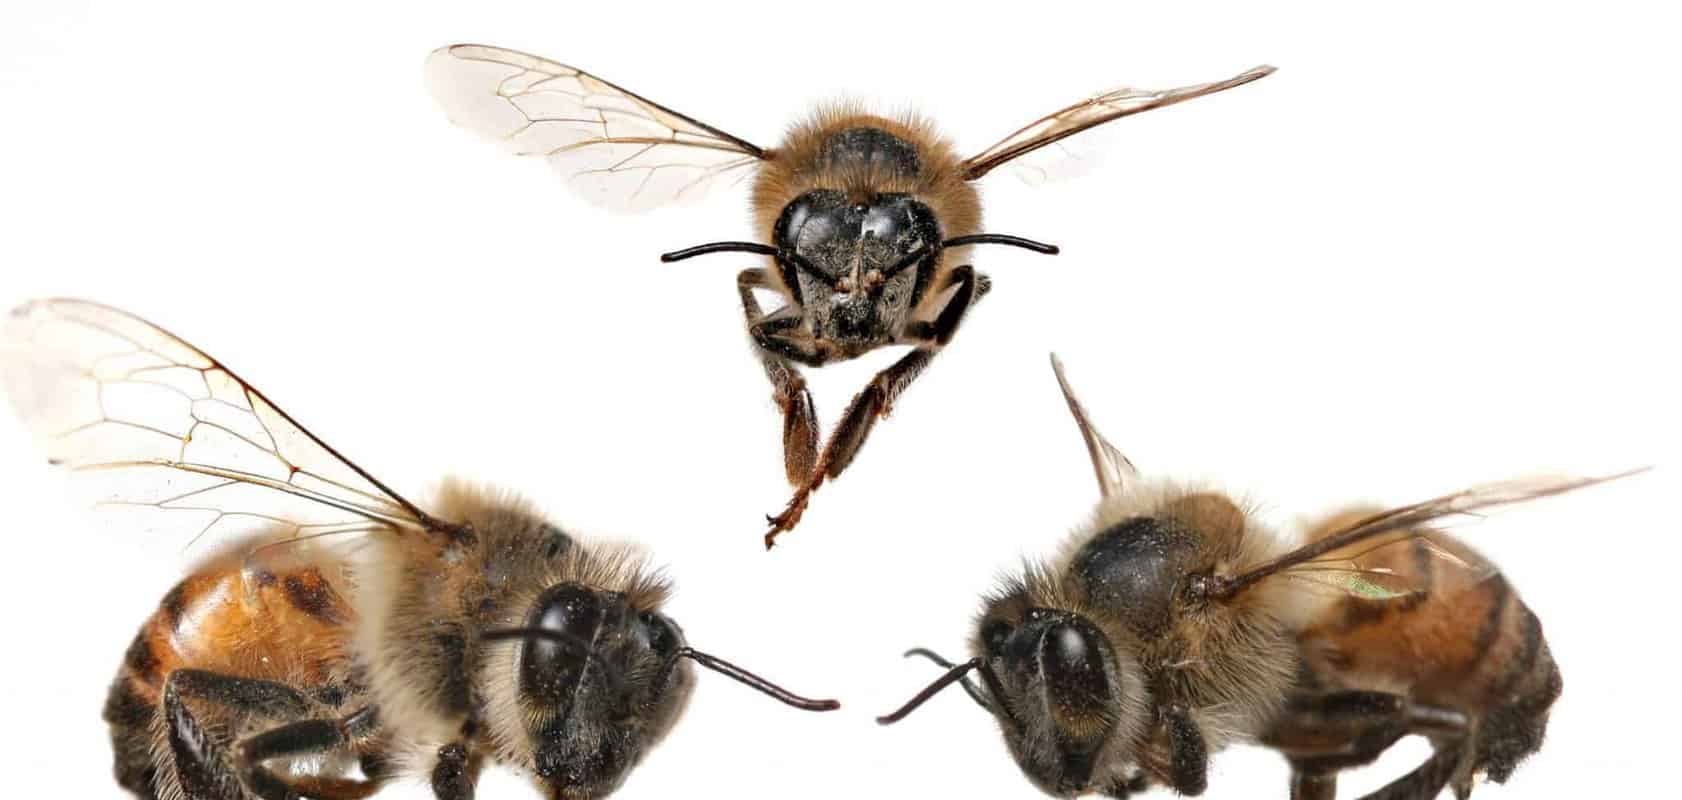 Do Male Or Female Bees Collect Pollen?